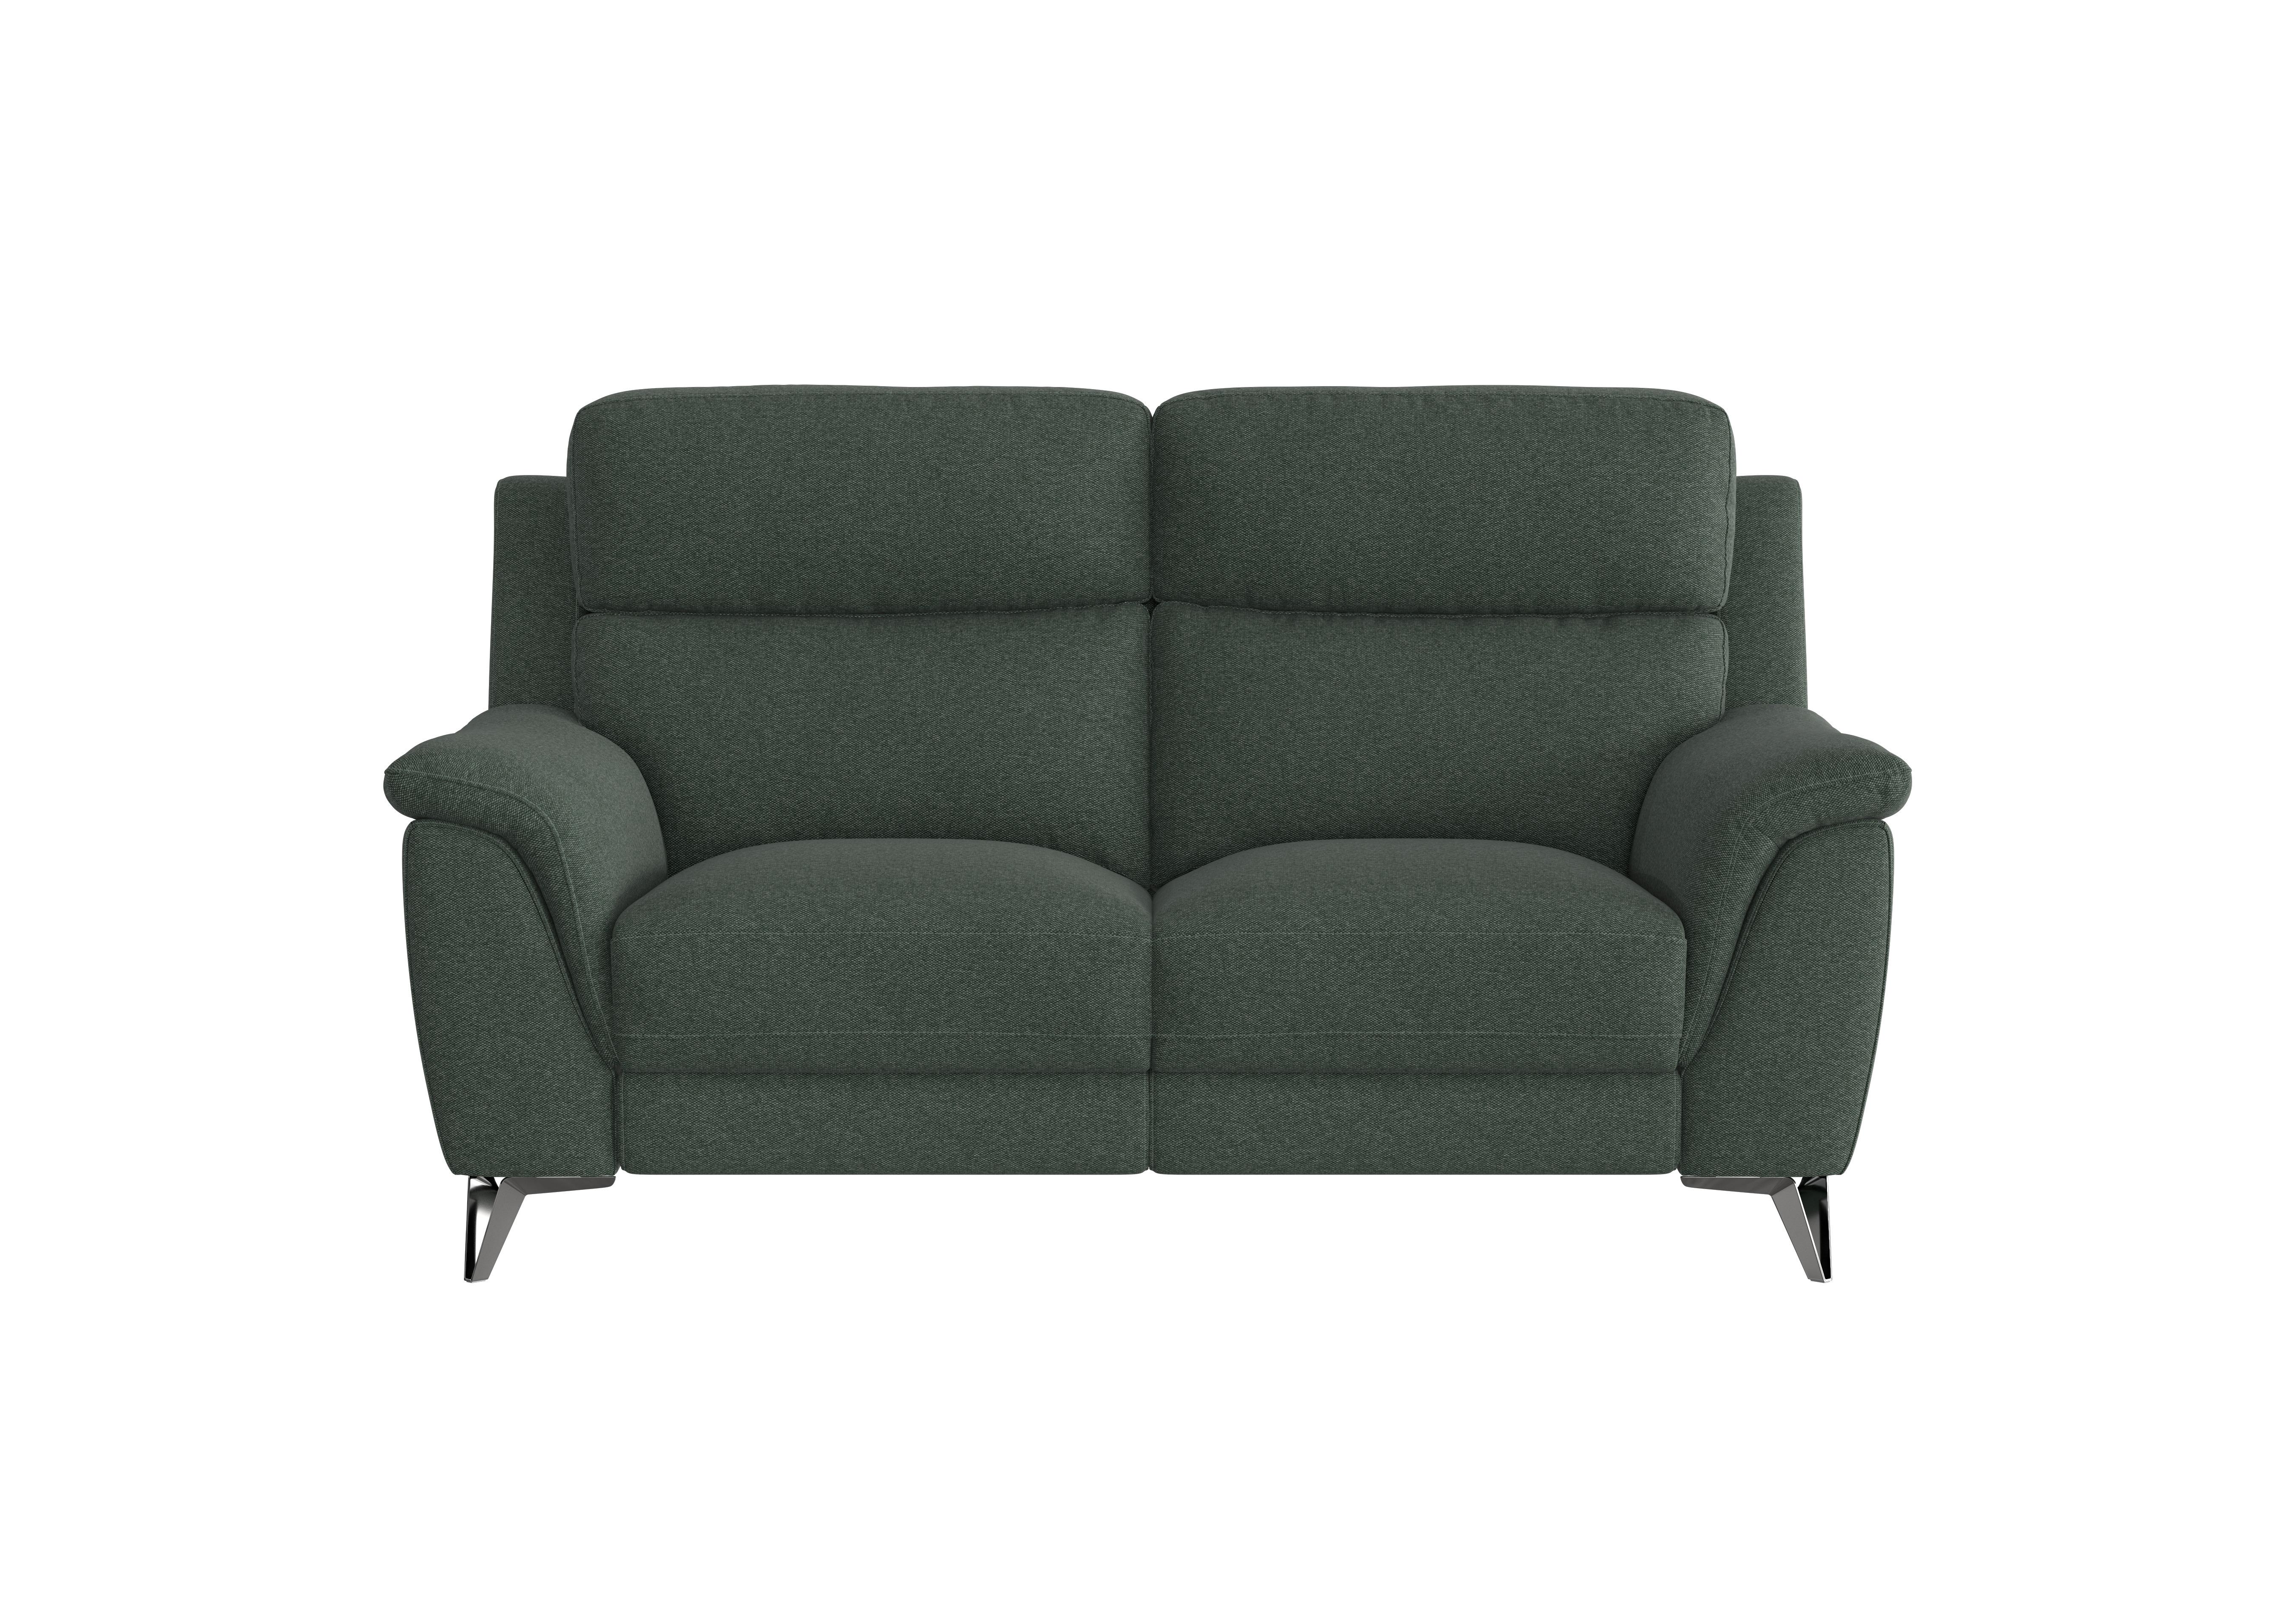 Contempo 2 Seater Fabric Sofa in Fab-Ska-R48 Moss Green on Furniture Village